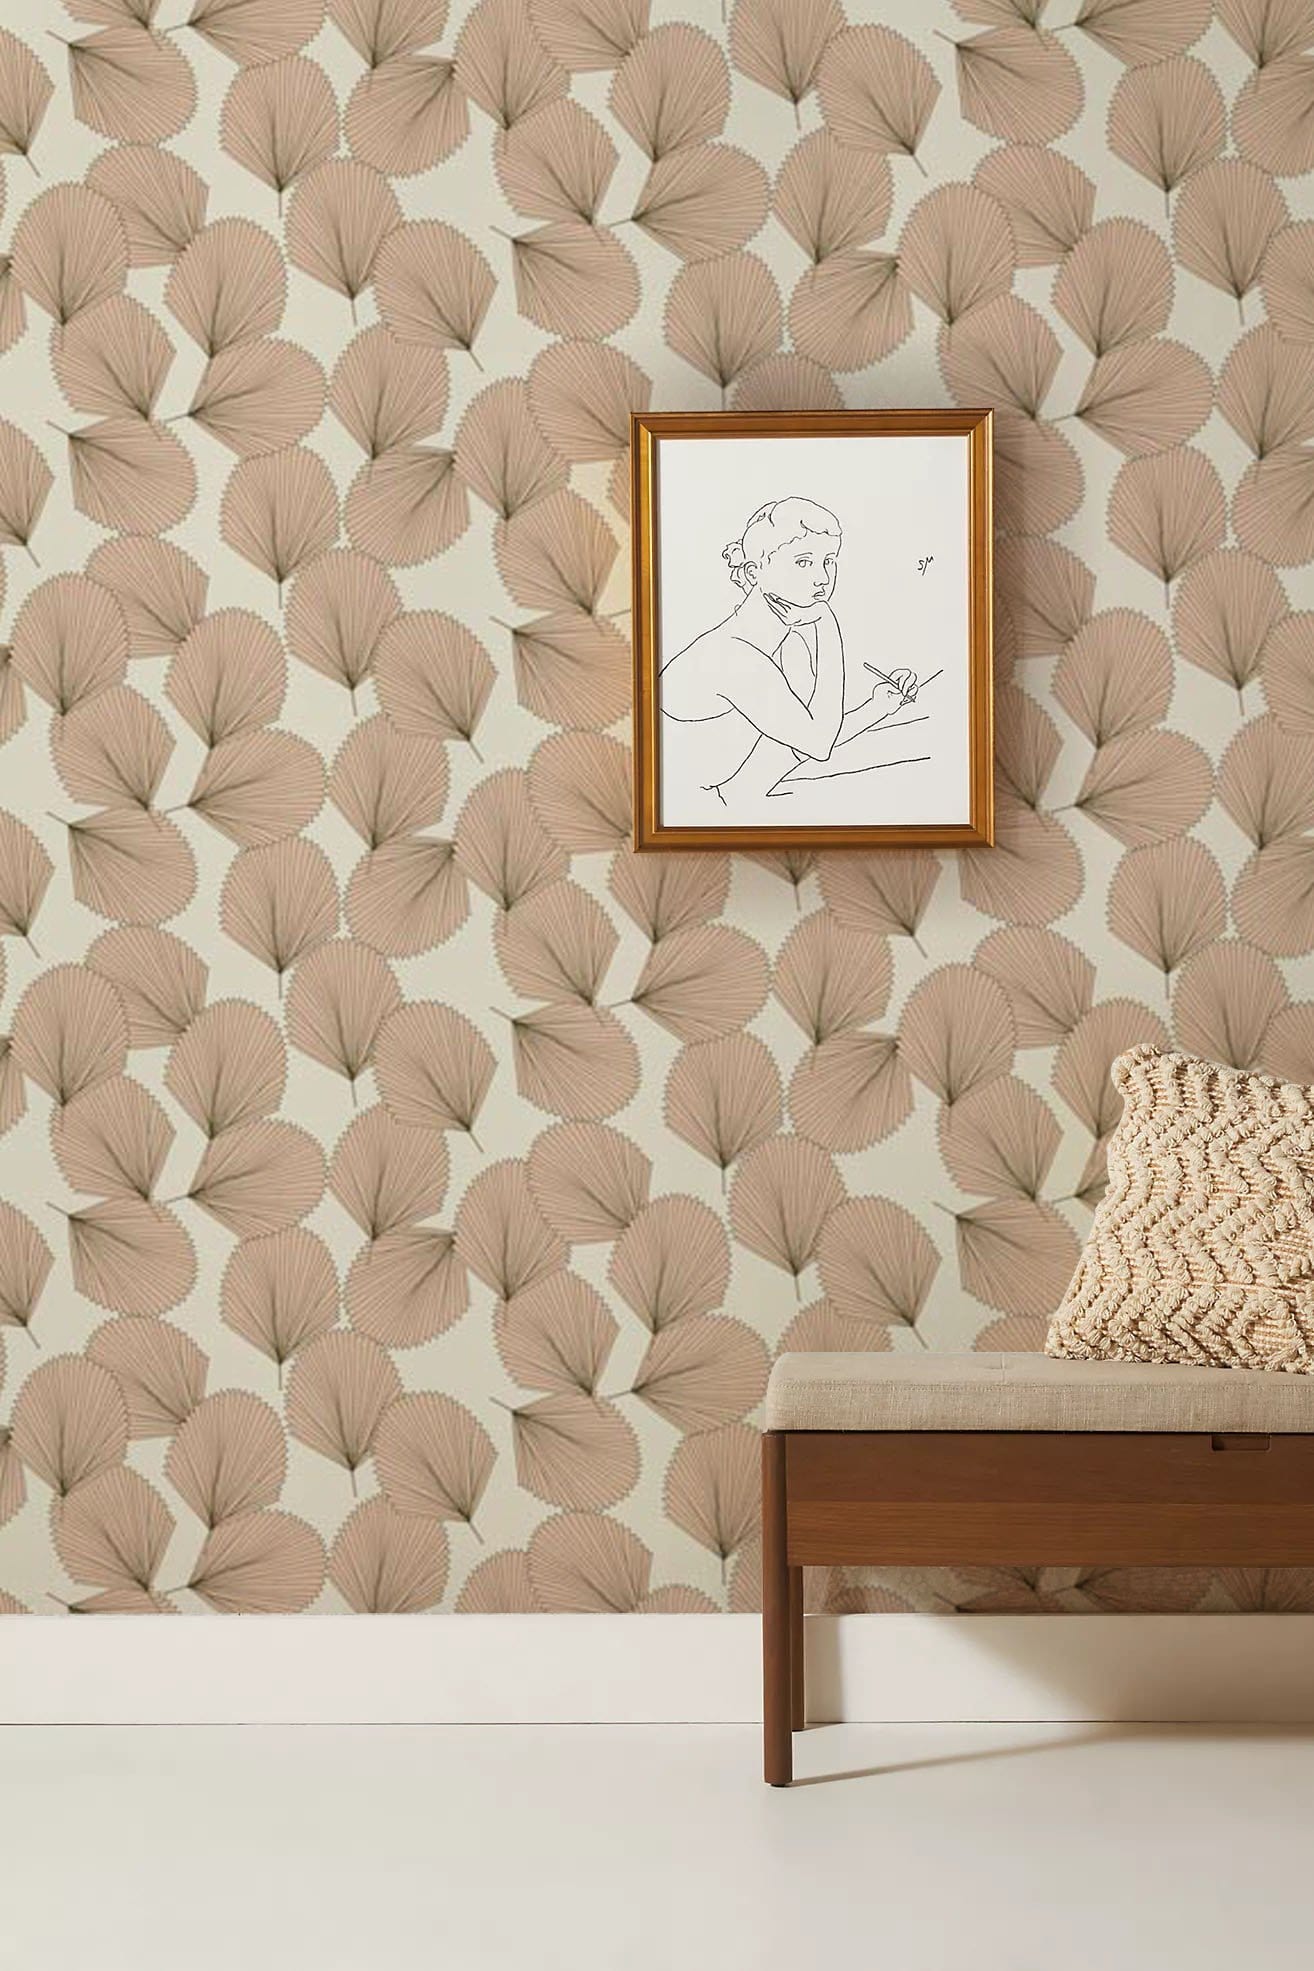 Hallway decor with cluttered ginkgo leaves wallpaper mural